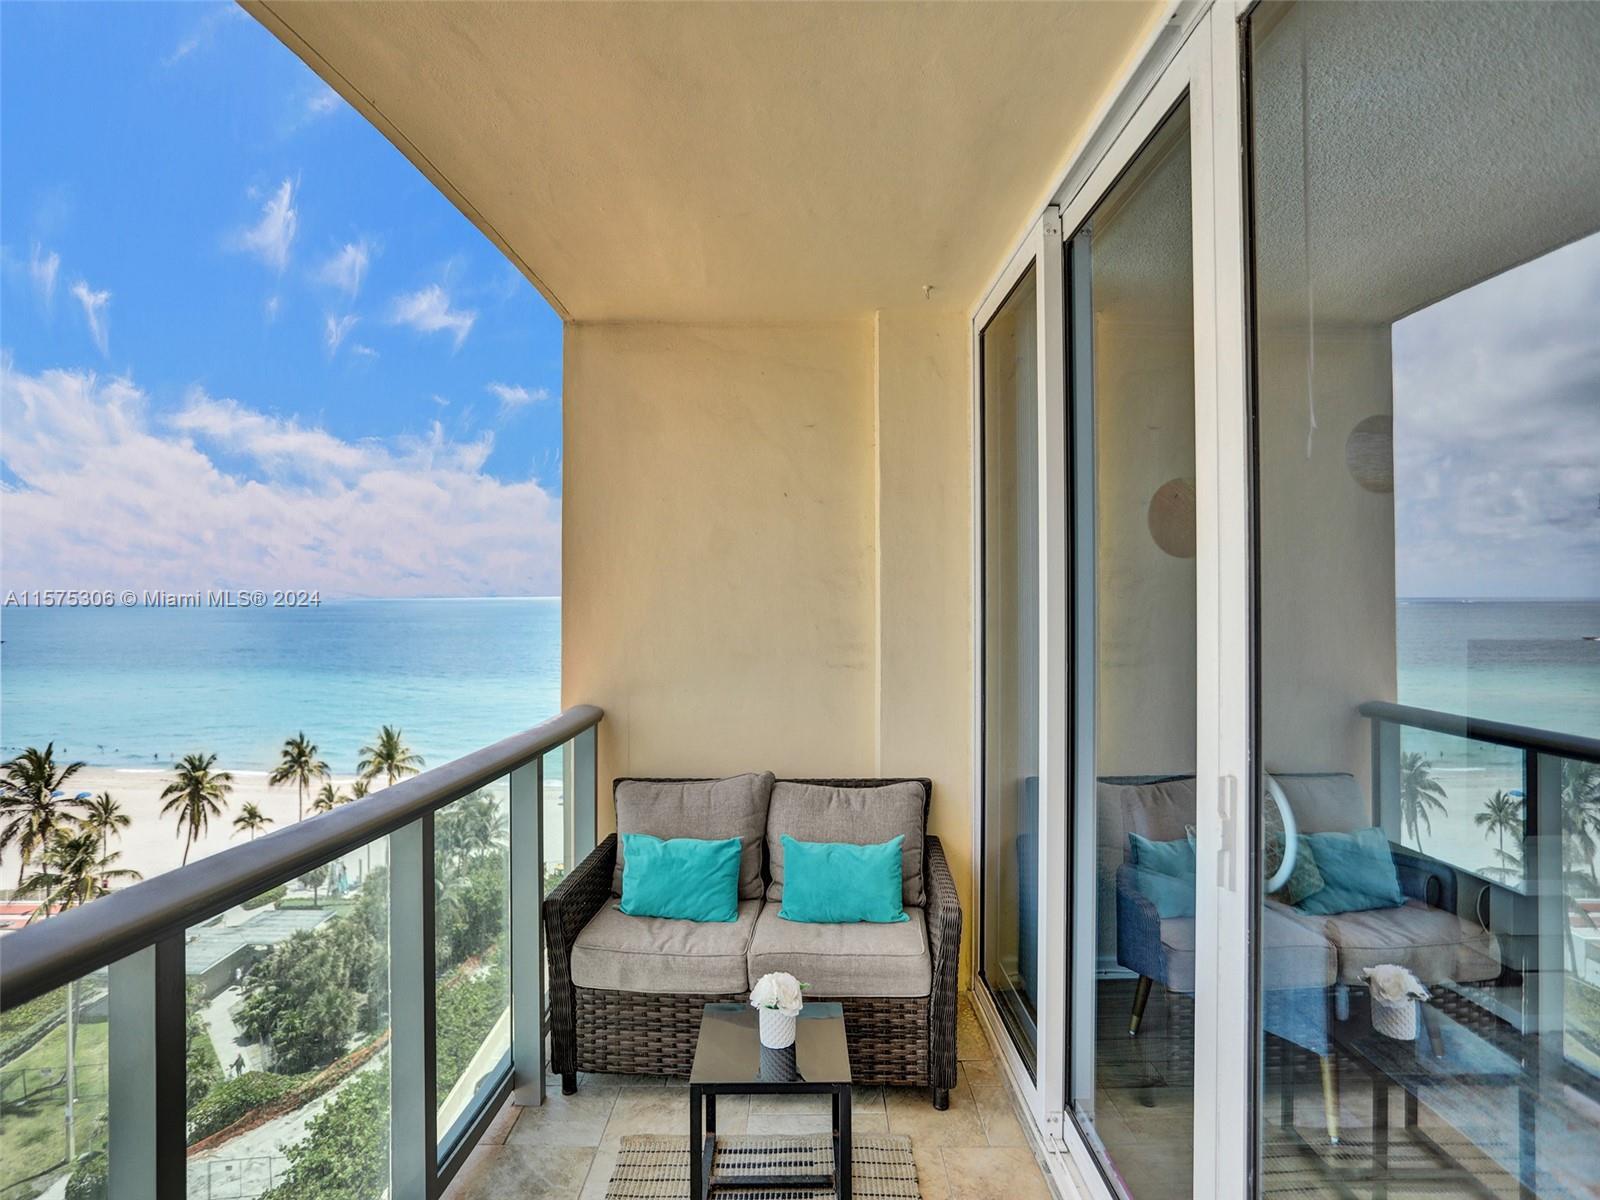 Photo of 2501 S Ocean Dr #1001 (Available Now) in Hollywood, FL